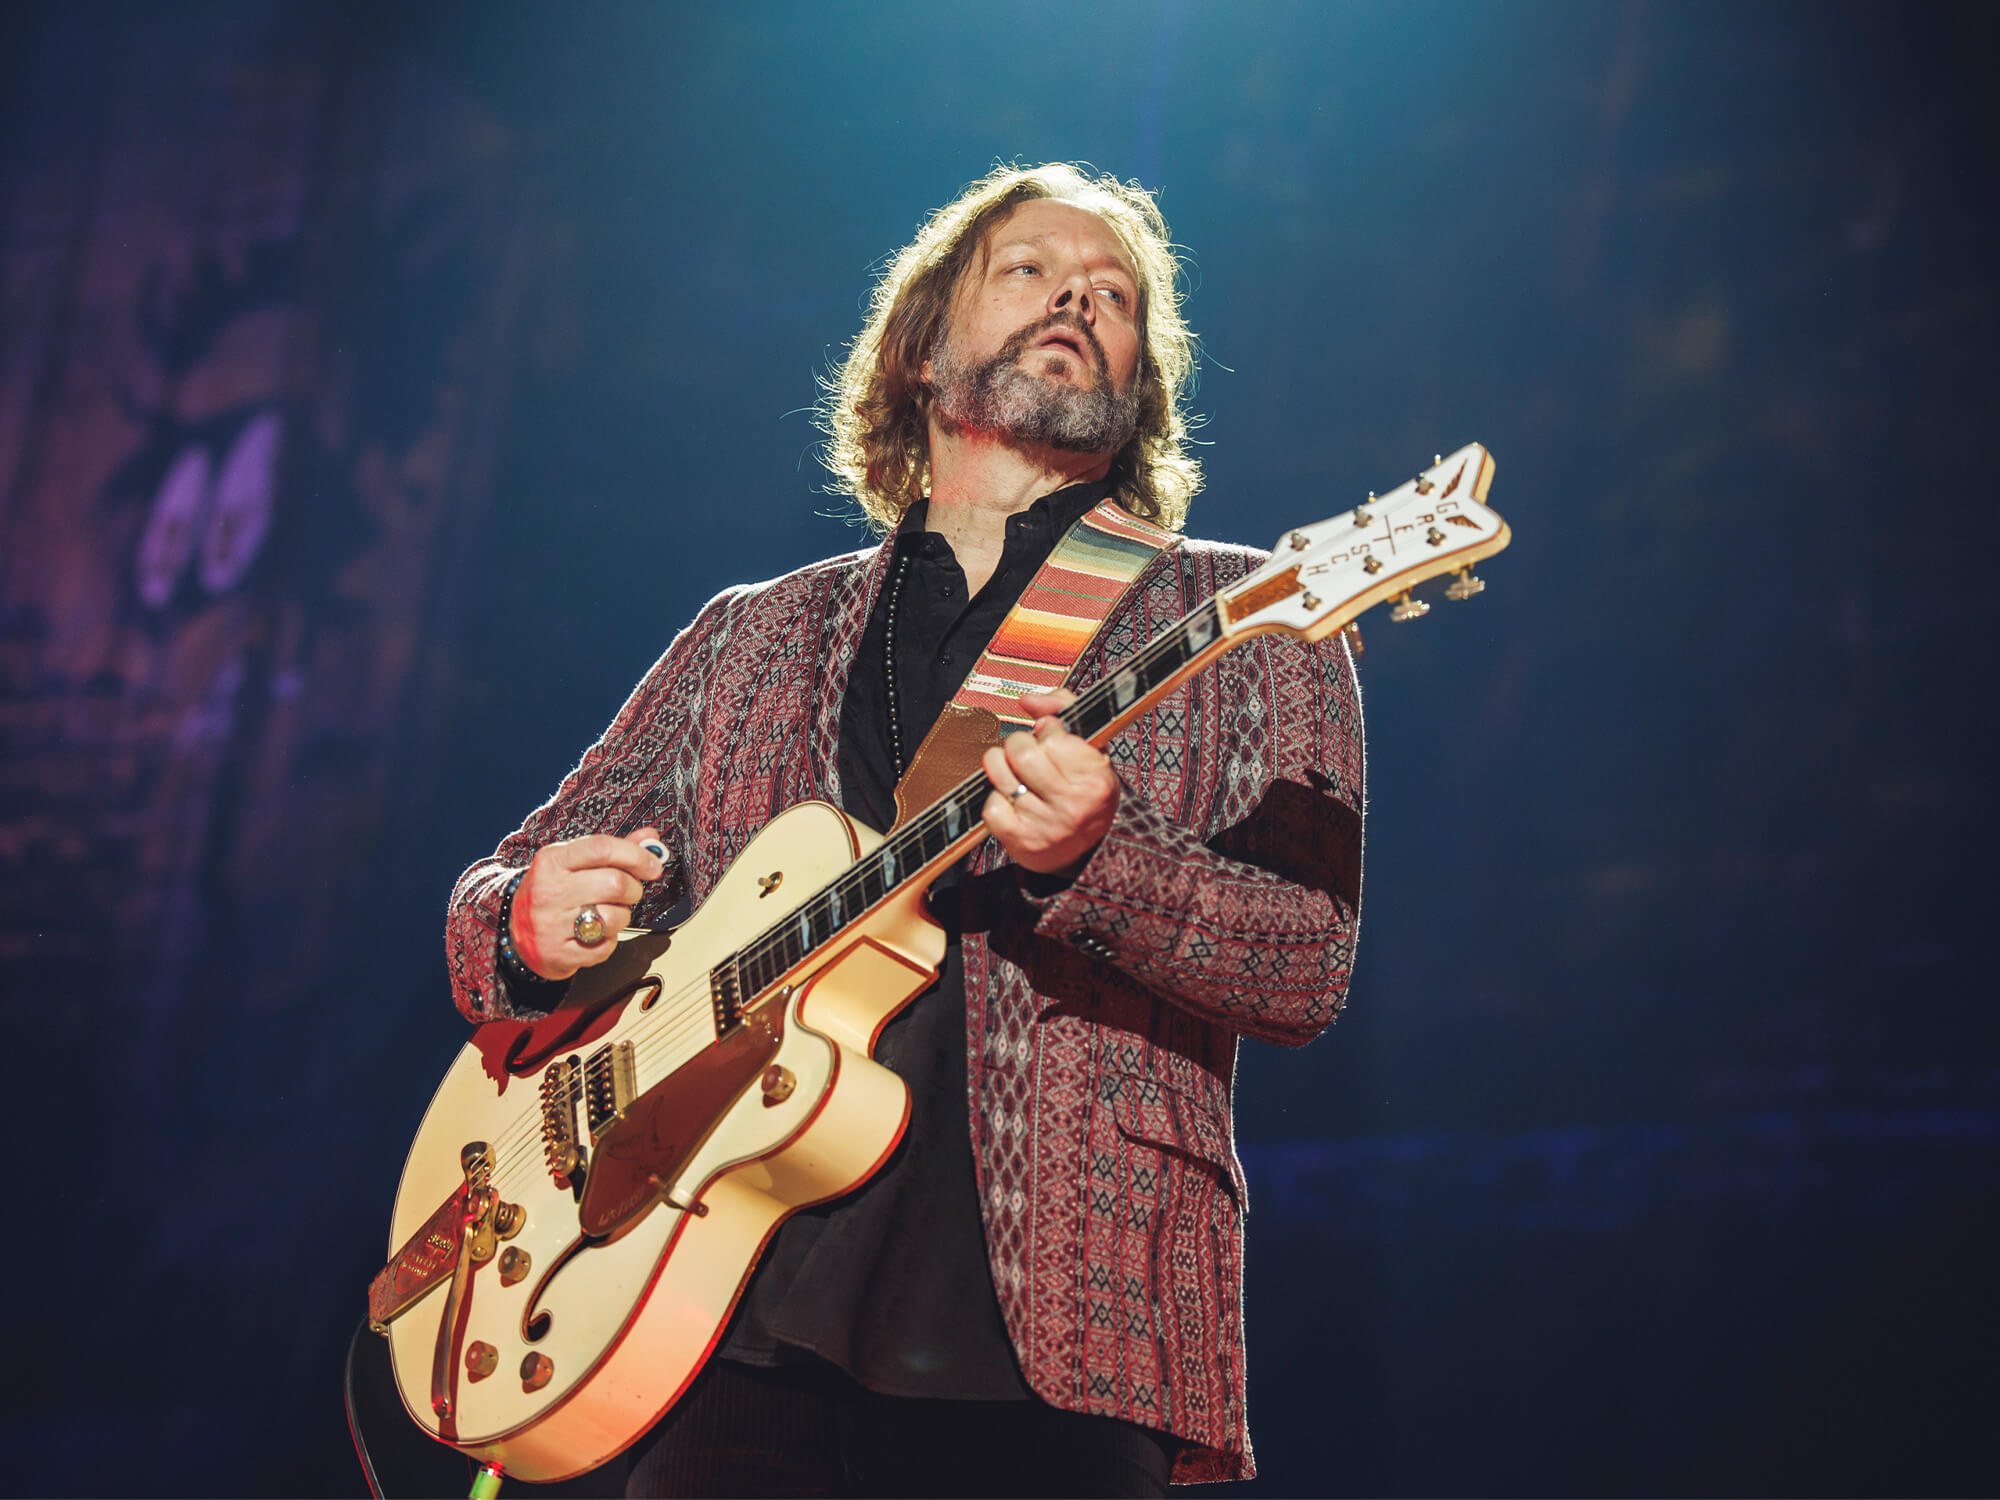 Rich Robinson playing a Gretsch guitar on stage.